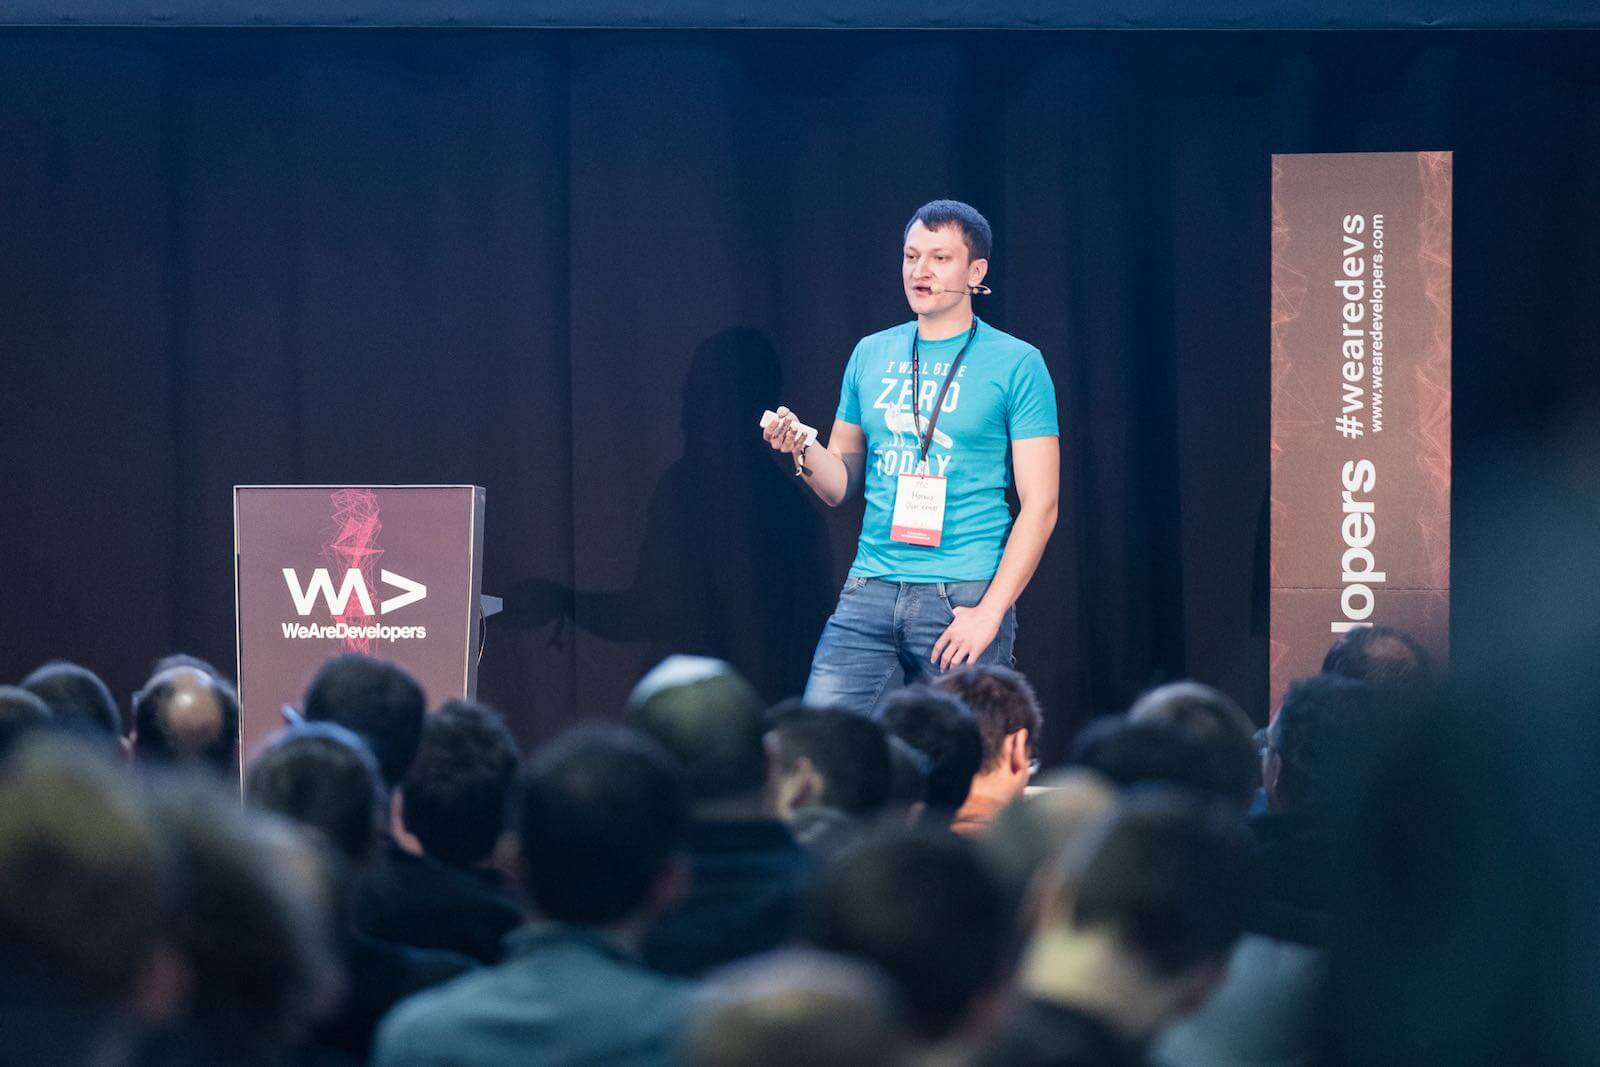 Markus Oberlehner on the stage at the WeAreDevelopers conference 2017